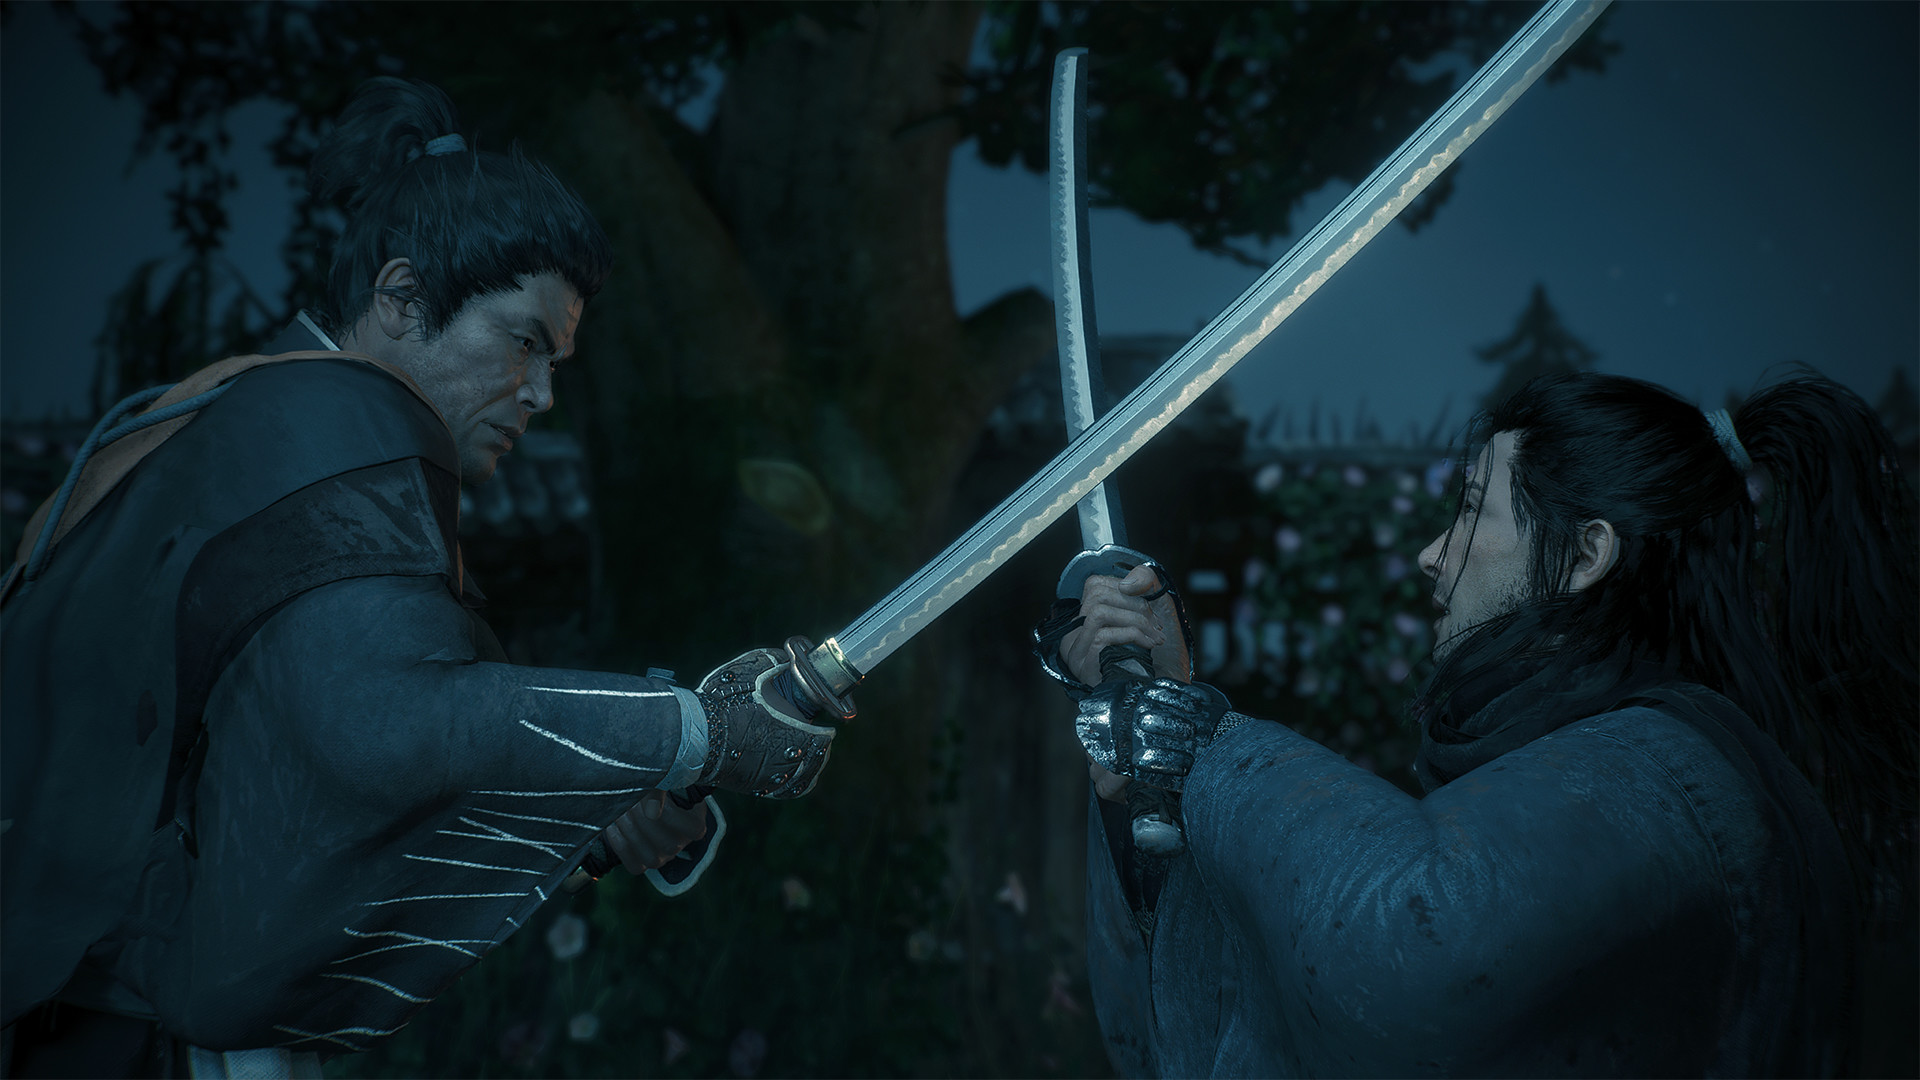 A screenshot from Rise of the Ronin, showing two people clashing swords.